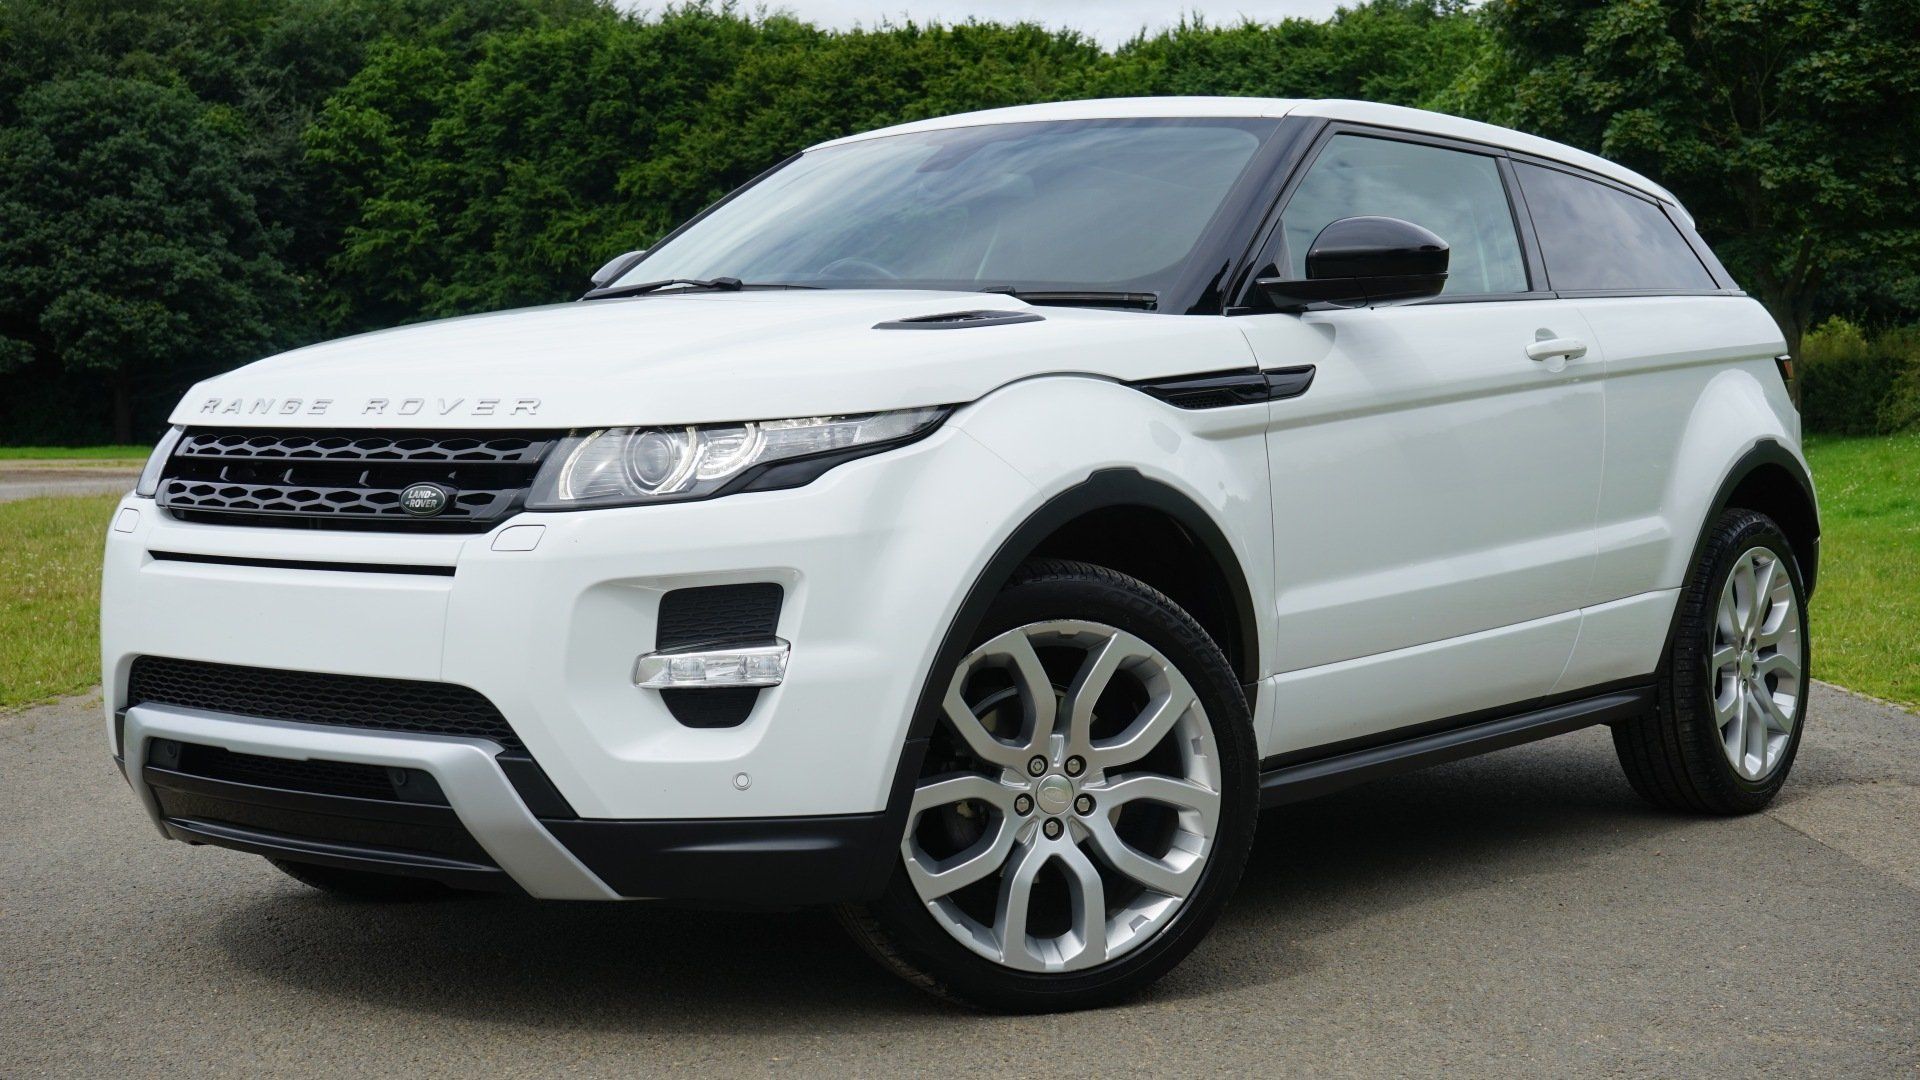 A white range rover evoque is parked on the side of the road.